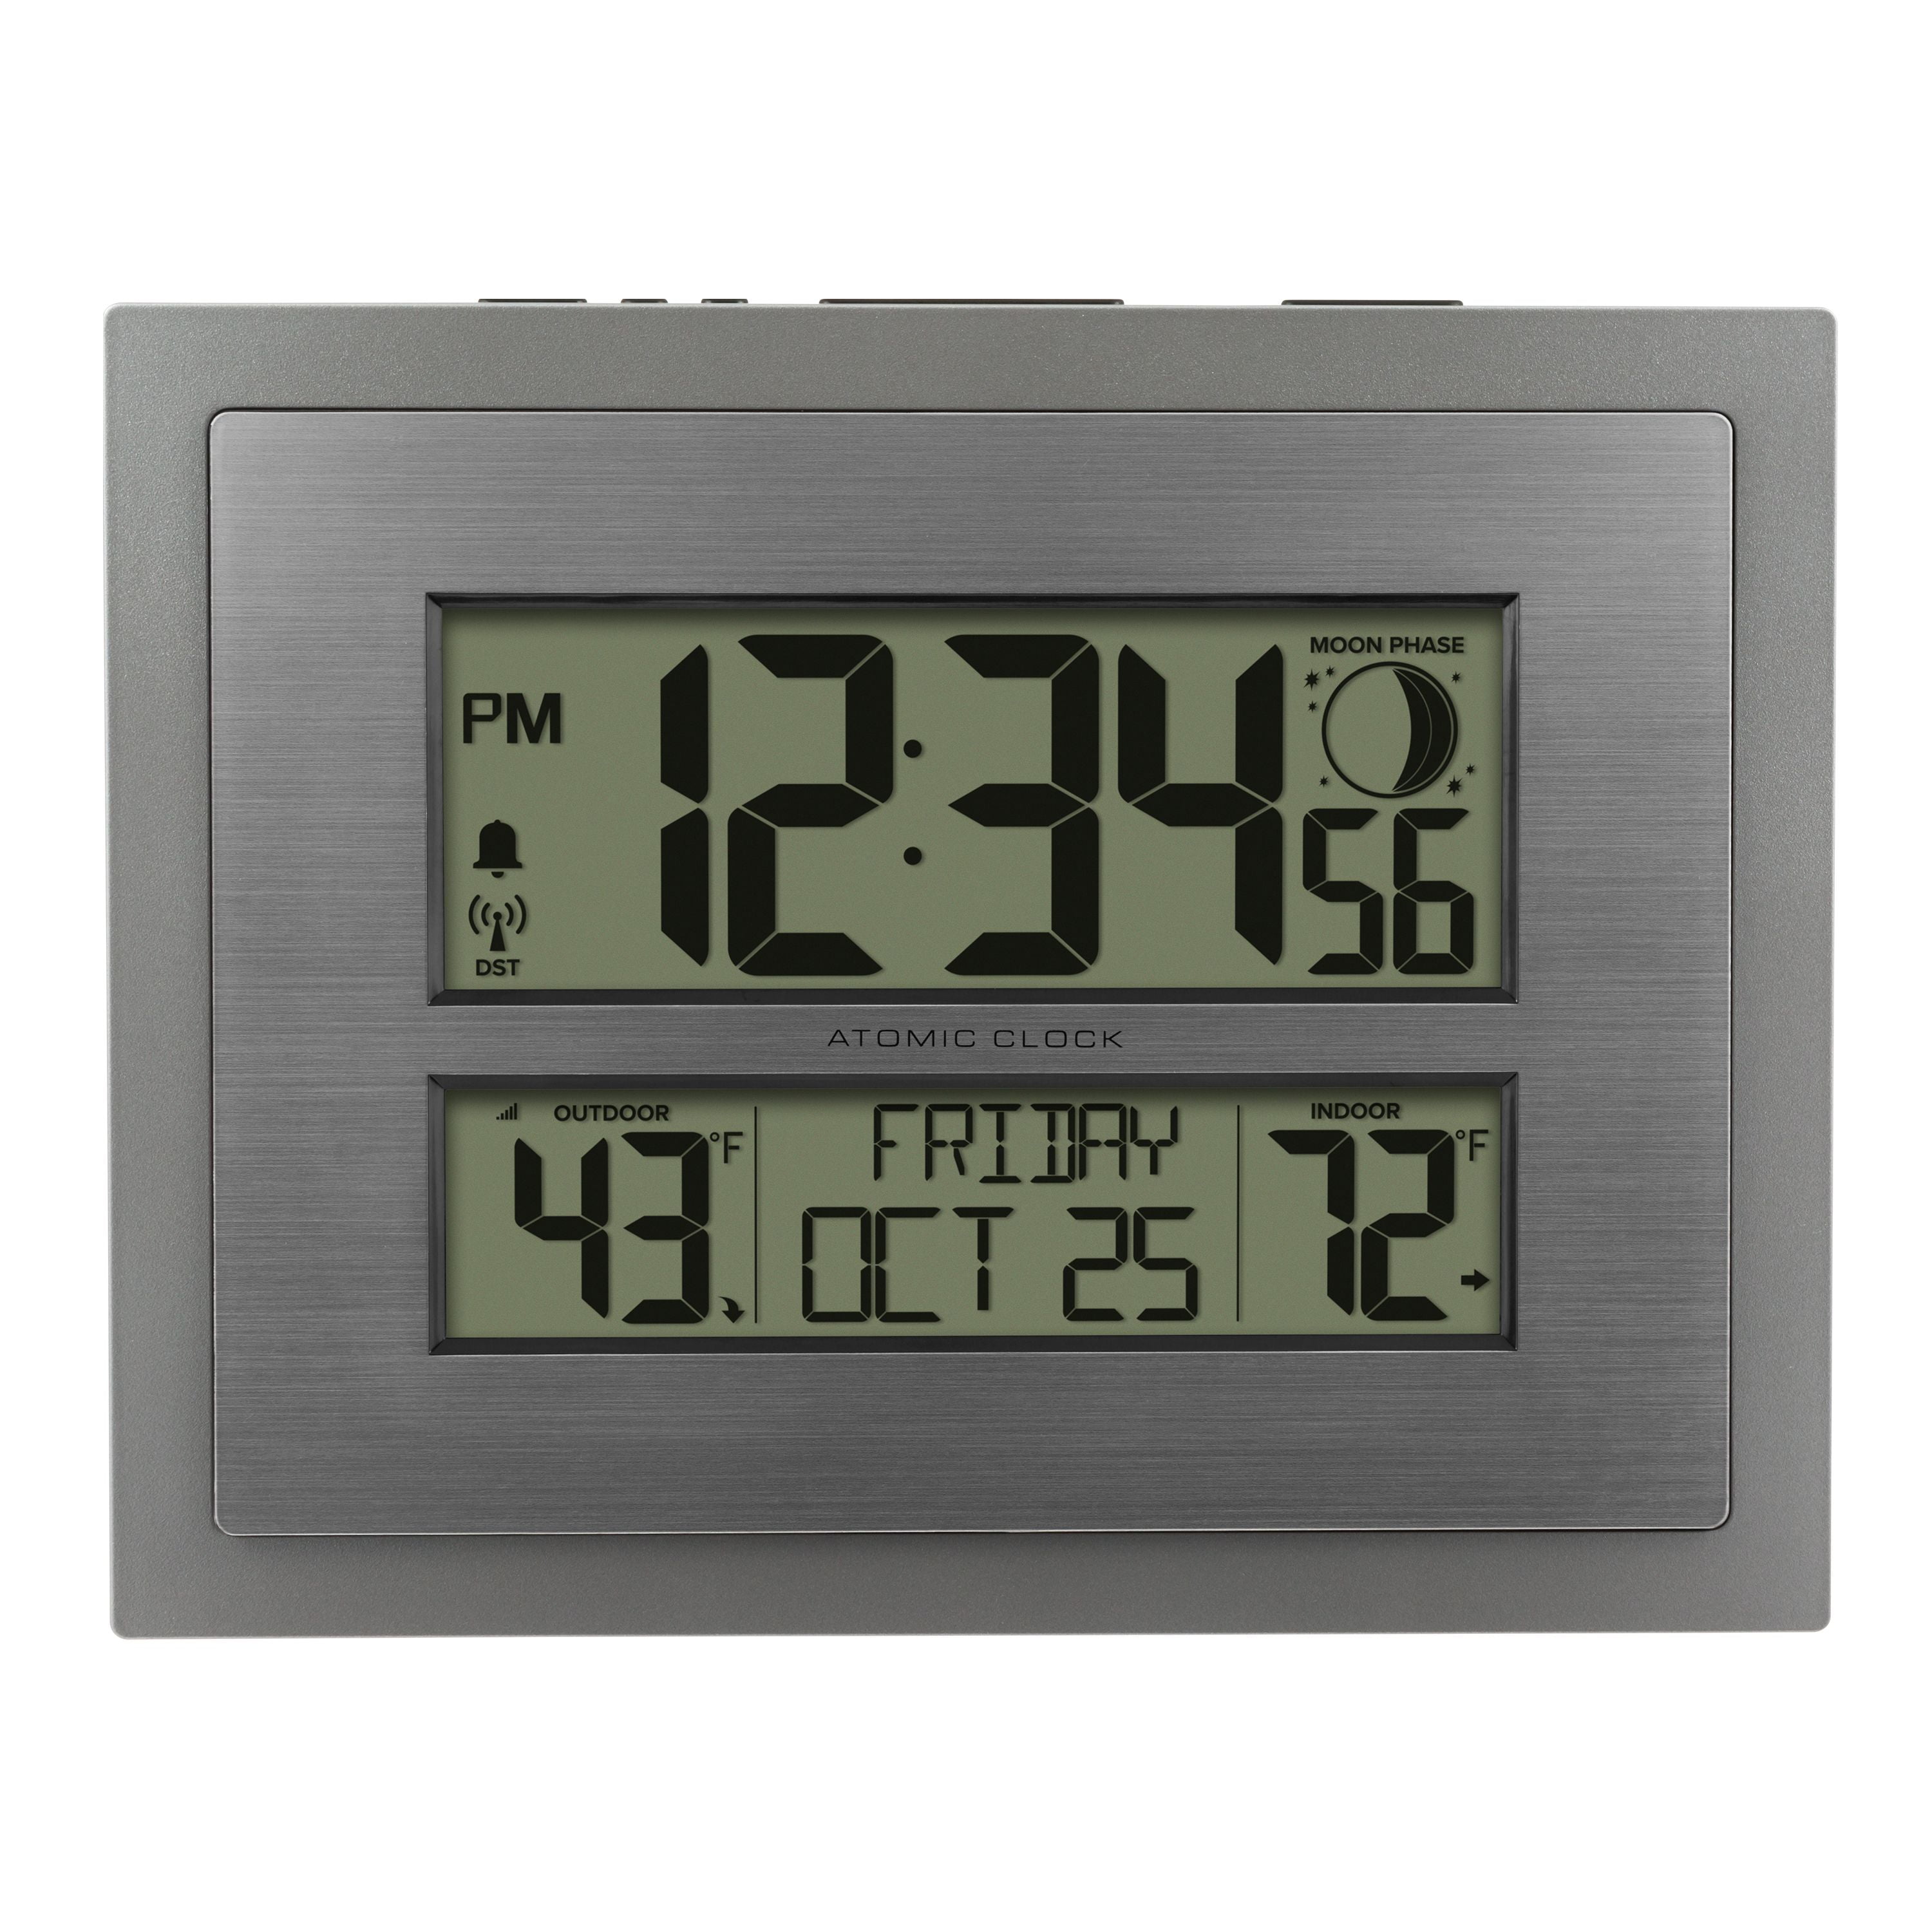 Better Homes & Gardens Silver Atomic Wall/Table Clock with Moon Phase